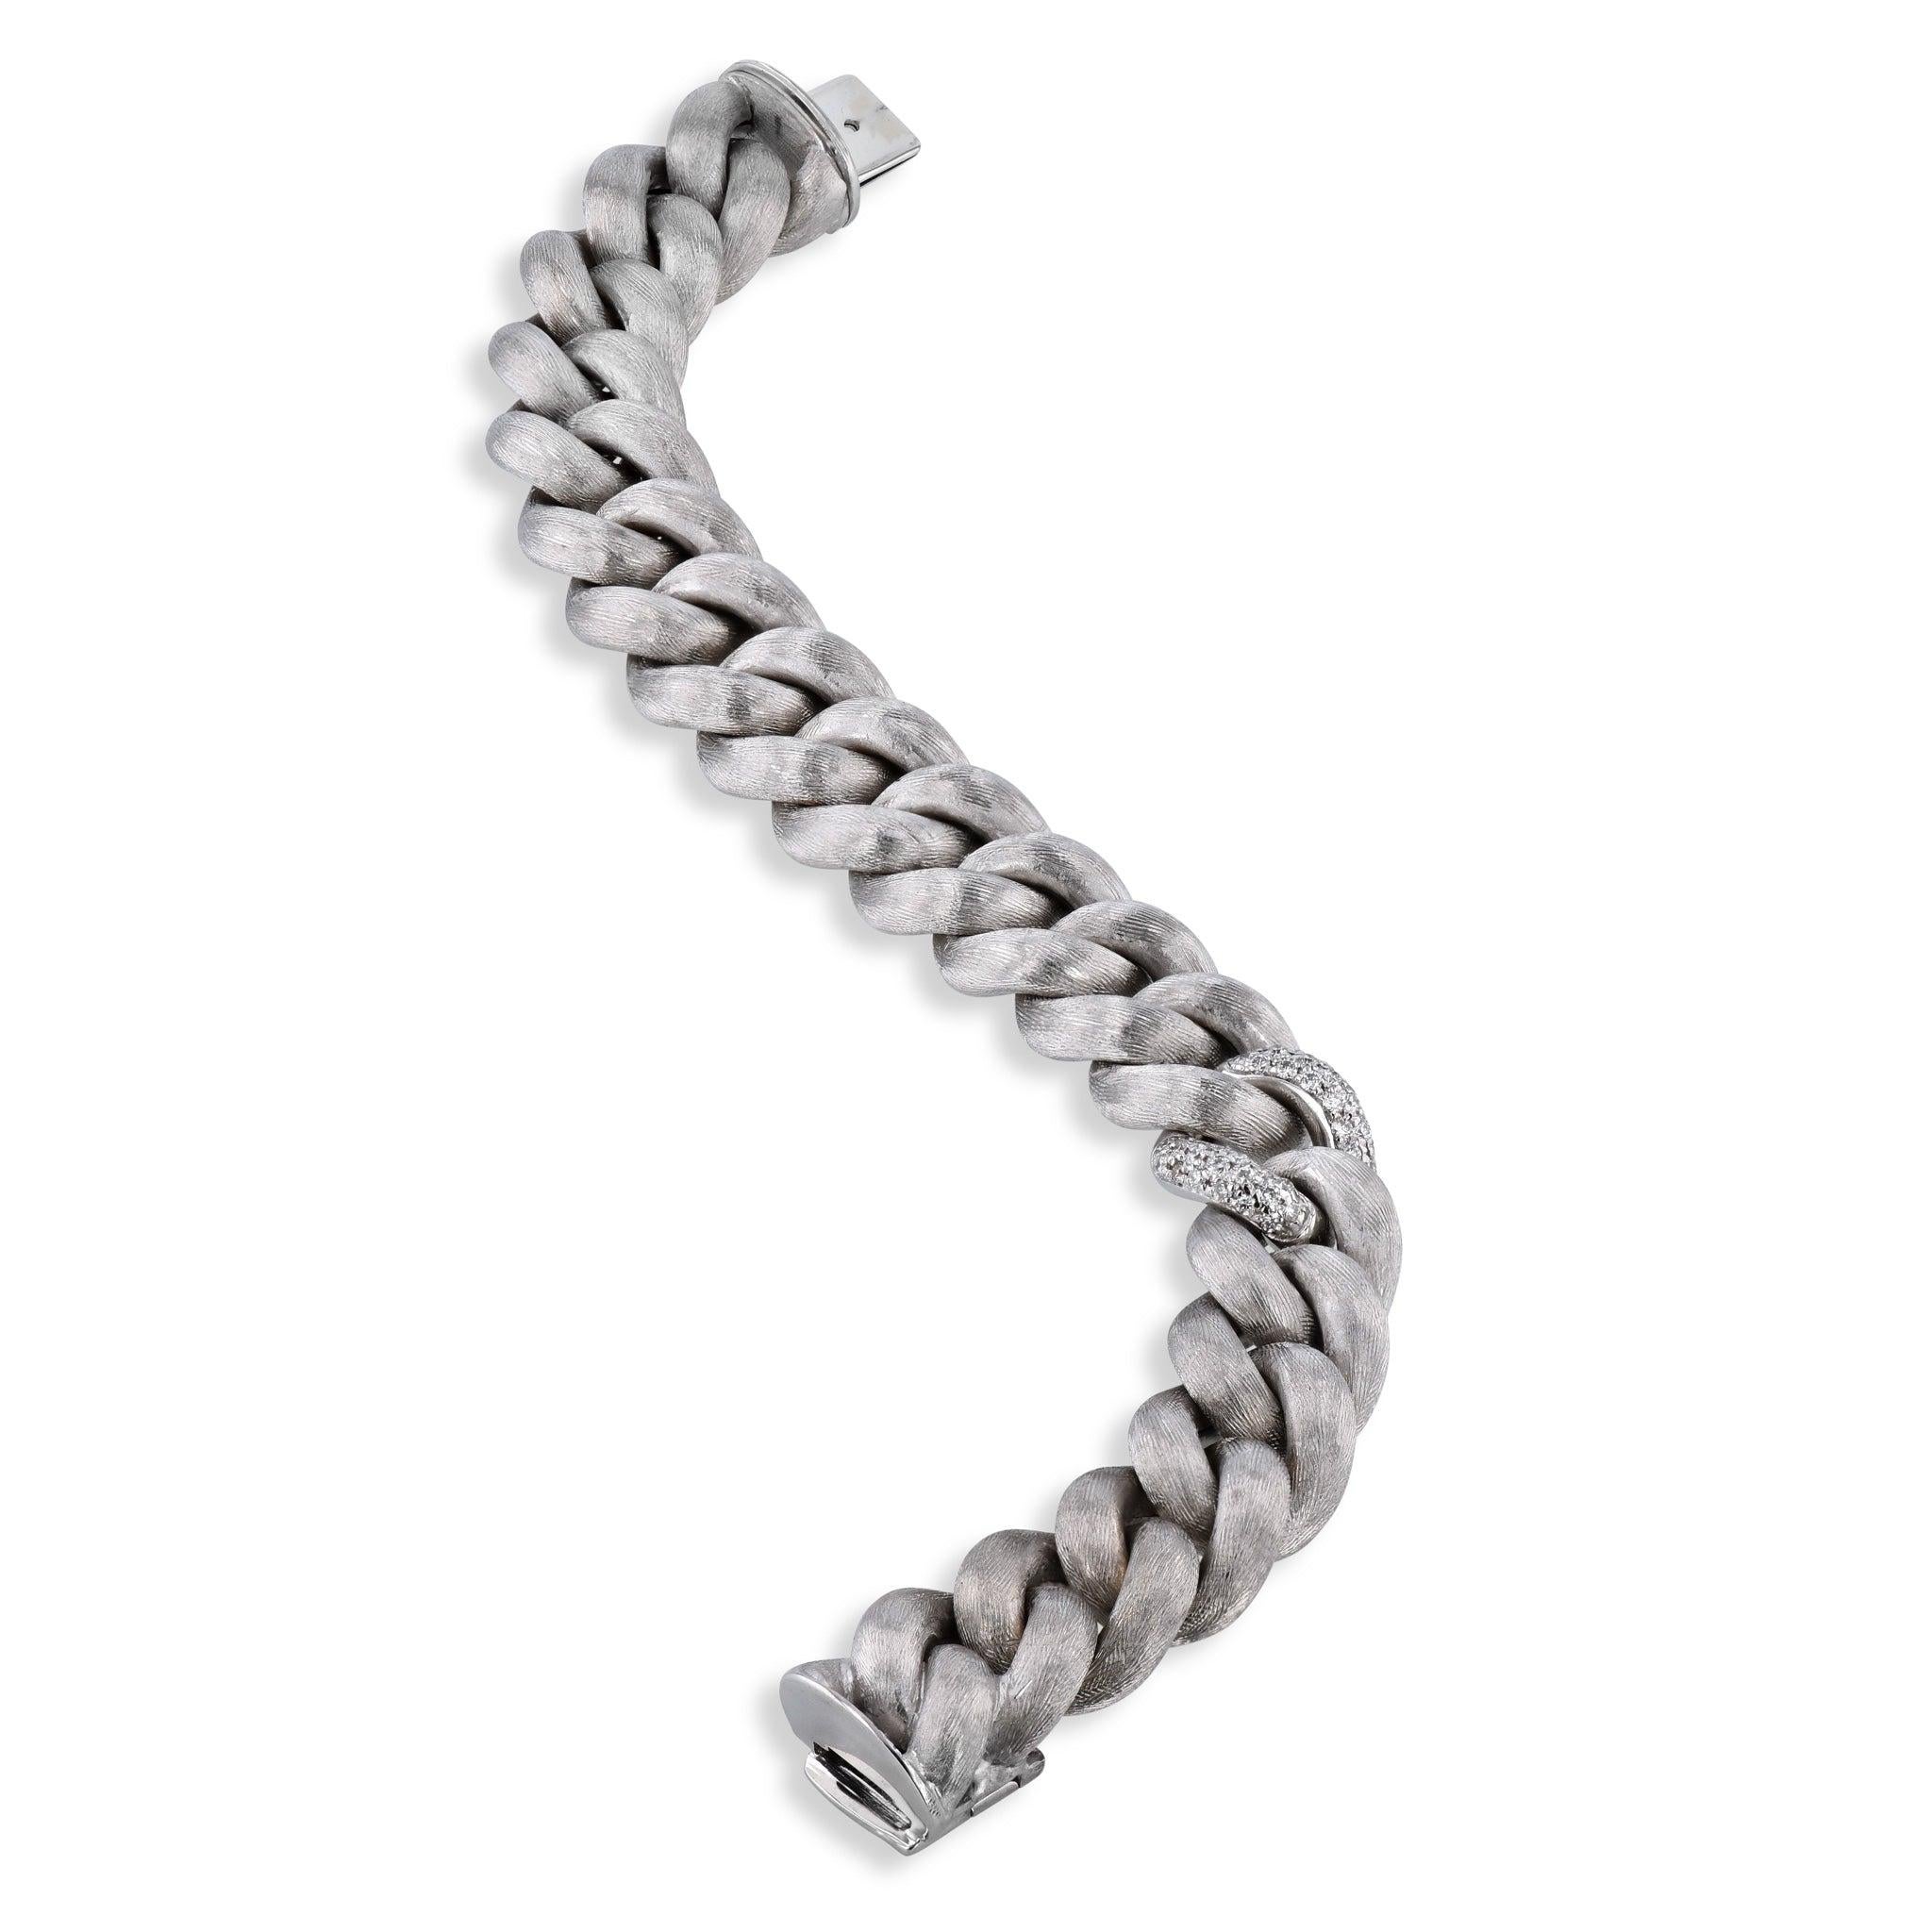 This exquisite White Gold Nicolis Cola Estate Bracelet is crafted from luxurious 18kt. white gold with a magnificent diamond pave of 38 sparkling round brilliant cut diamonds. The radiant Italian made estate bracelet is 7.5 inches long and 14.50mm